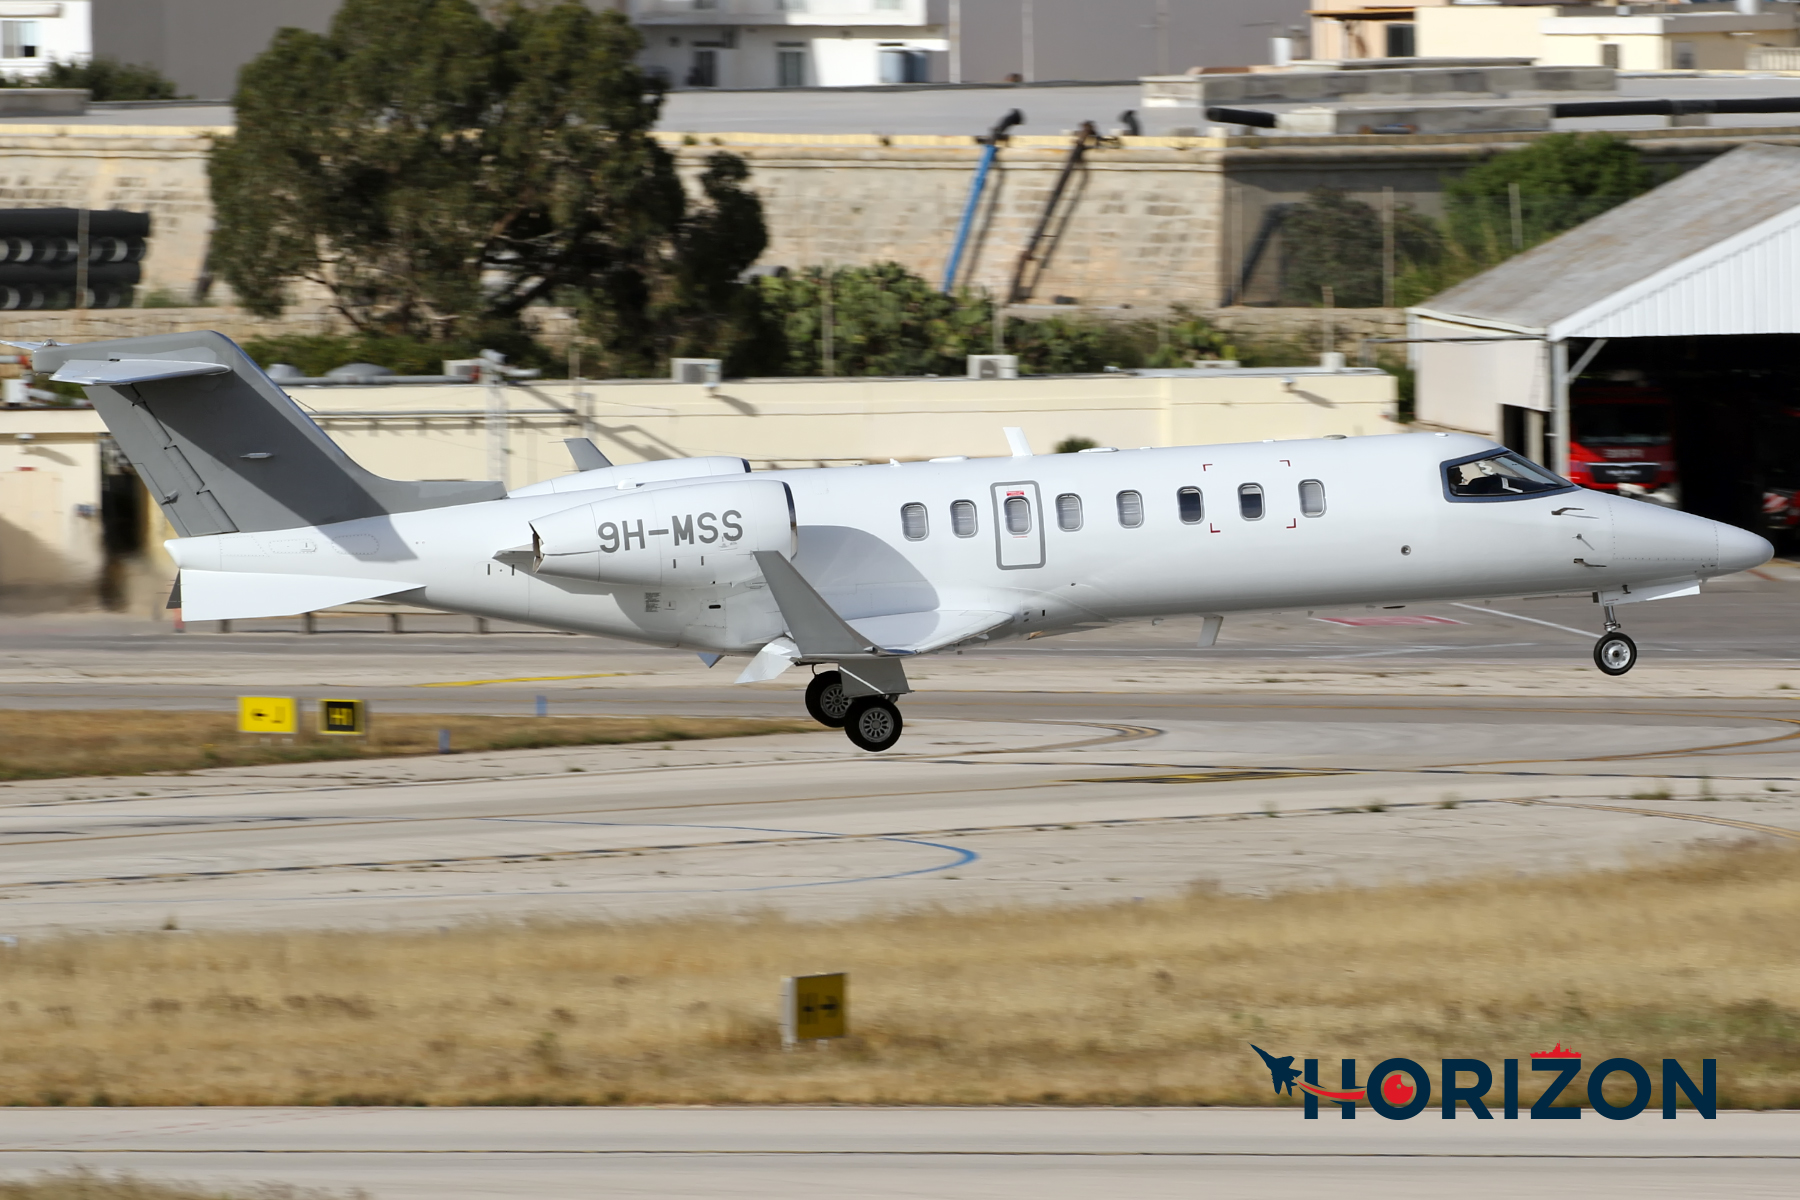 Hyperion Aviation Learjet 45 9H-MSS. Photo: Christopher Ebejer